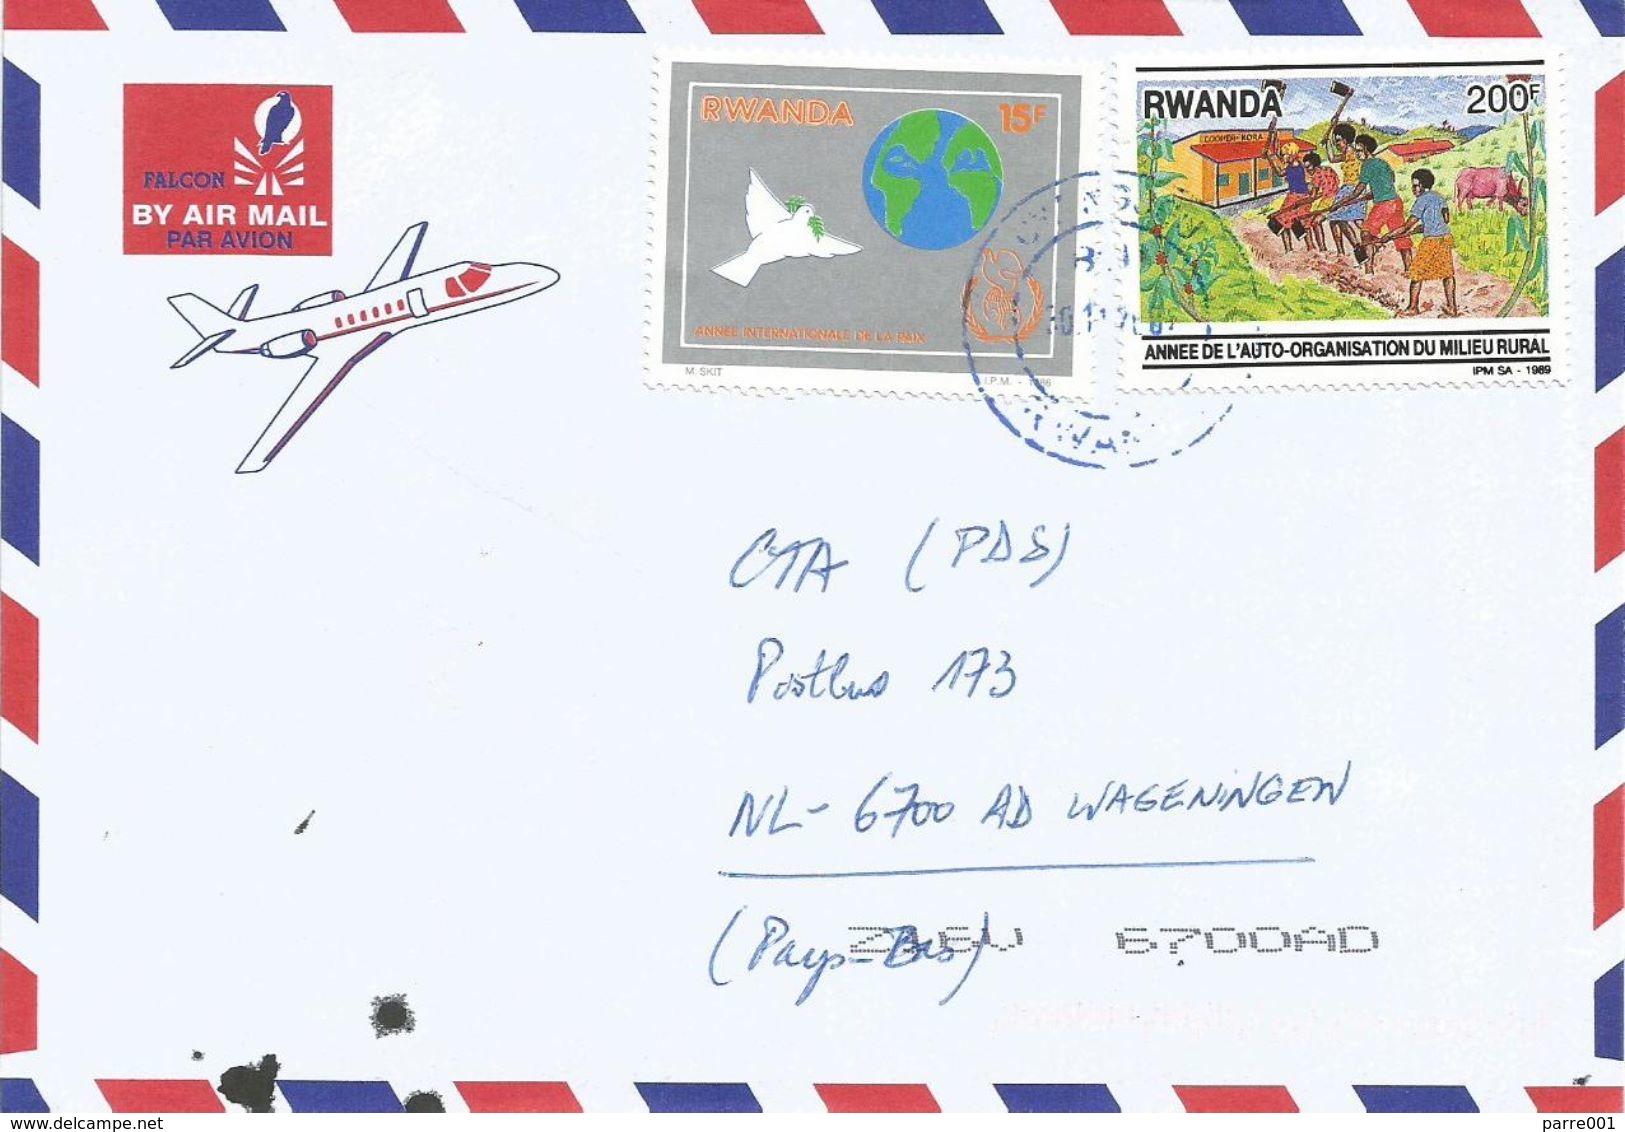 Rwanda 2003 Cyangugu Dove Peace Year Agriculture Cover - Used Stamps